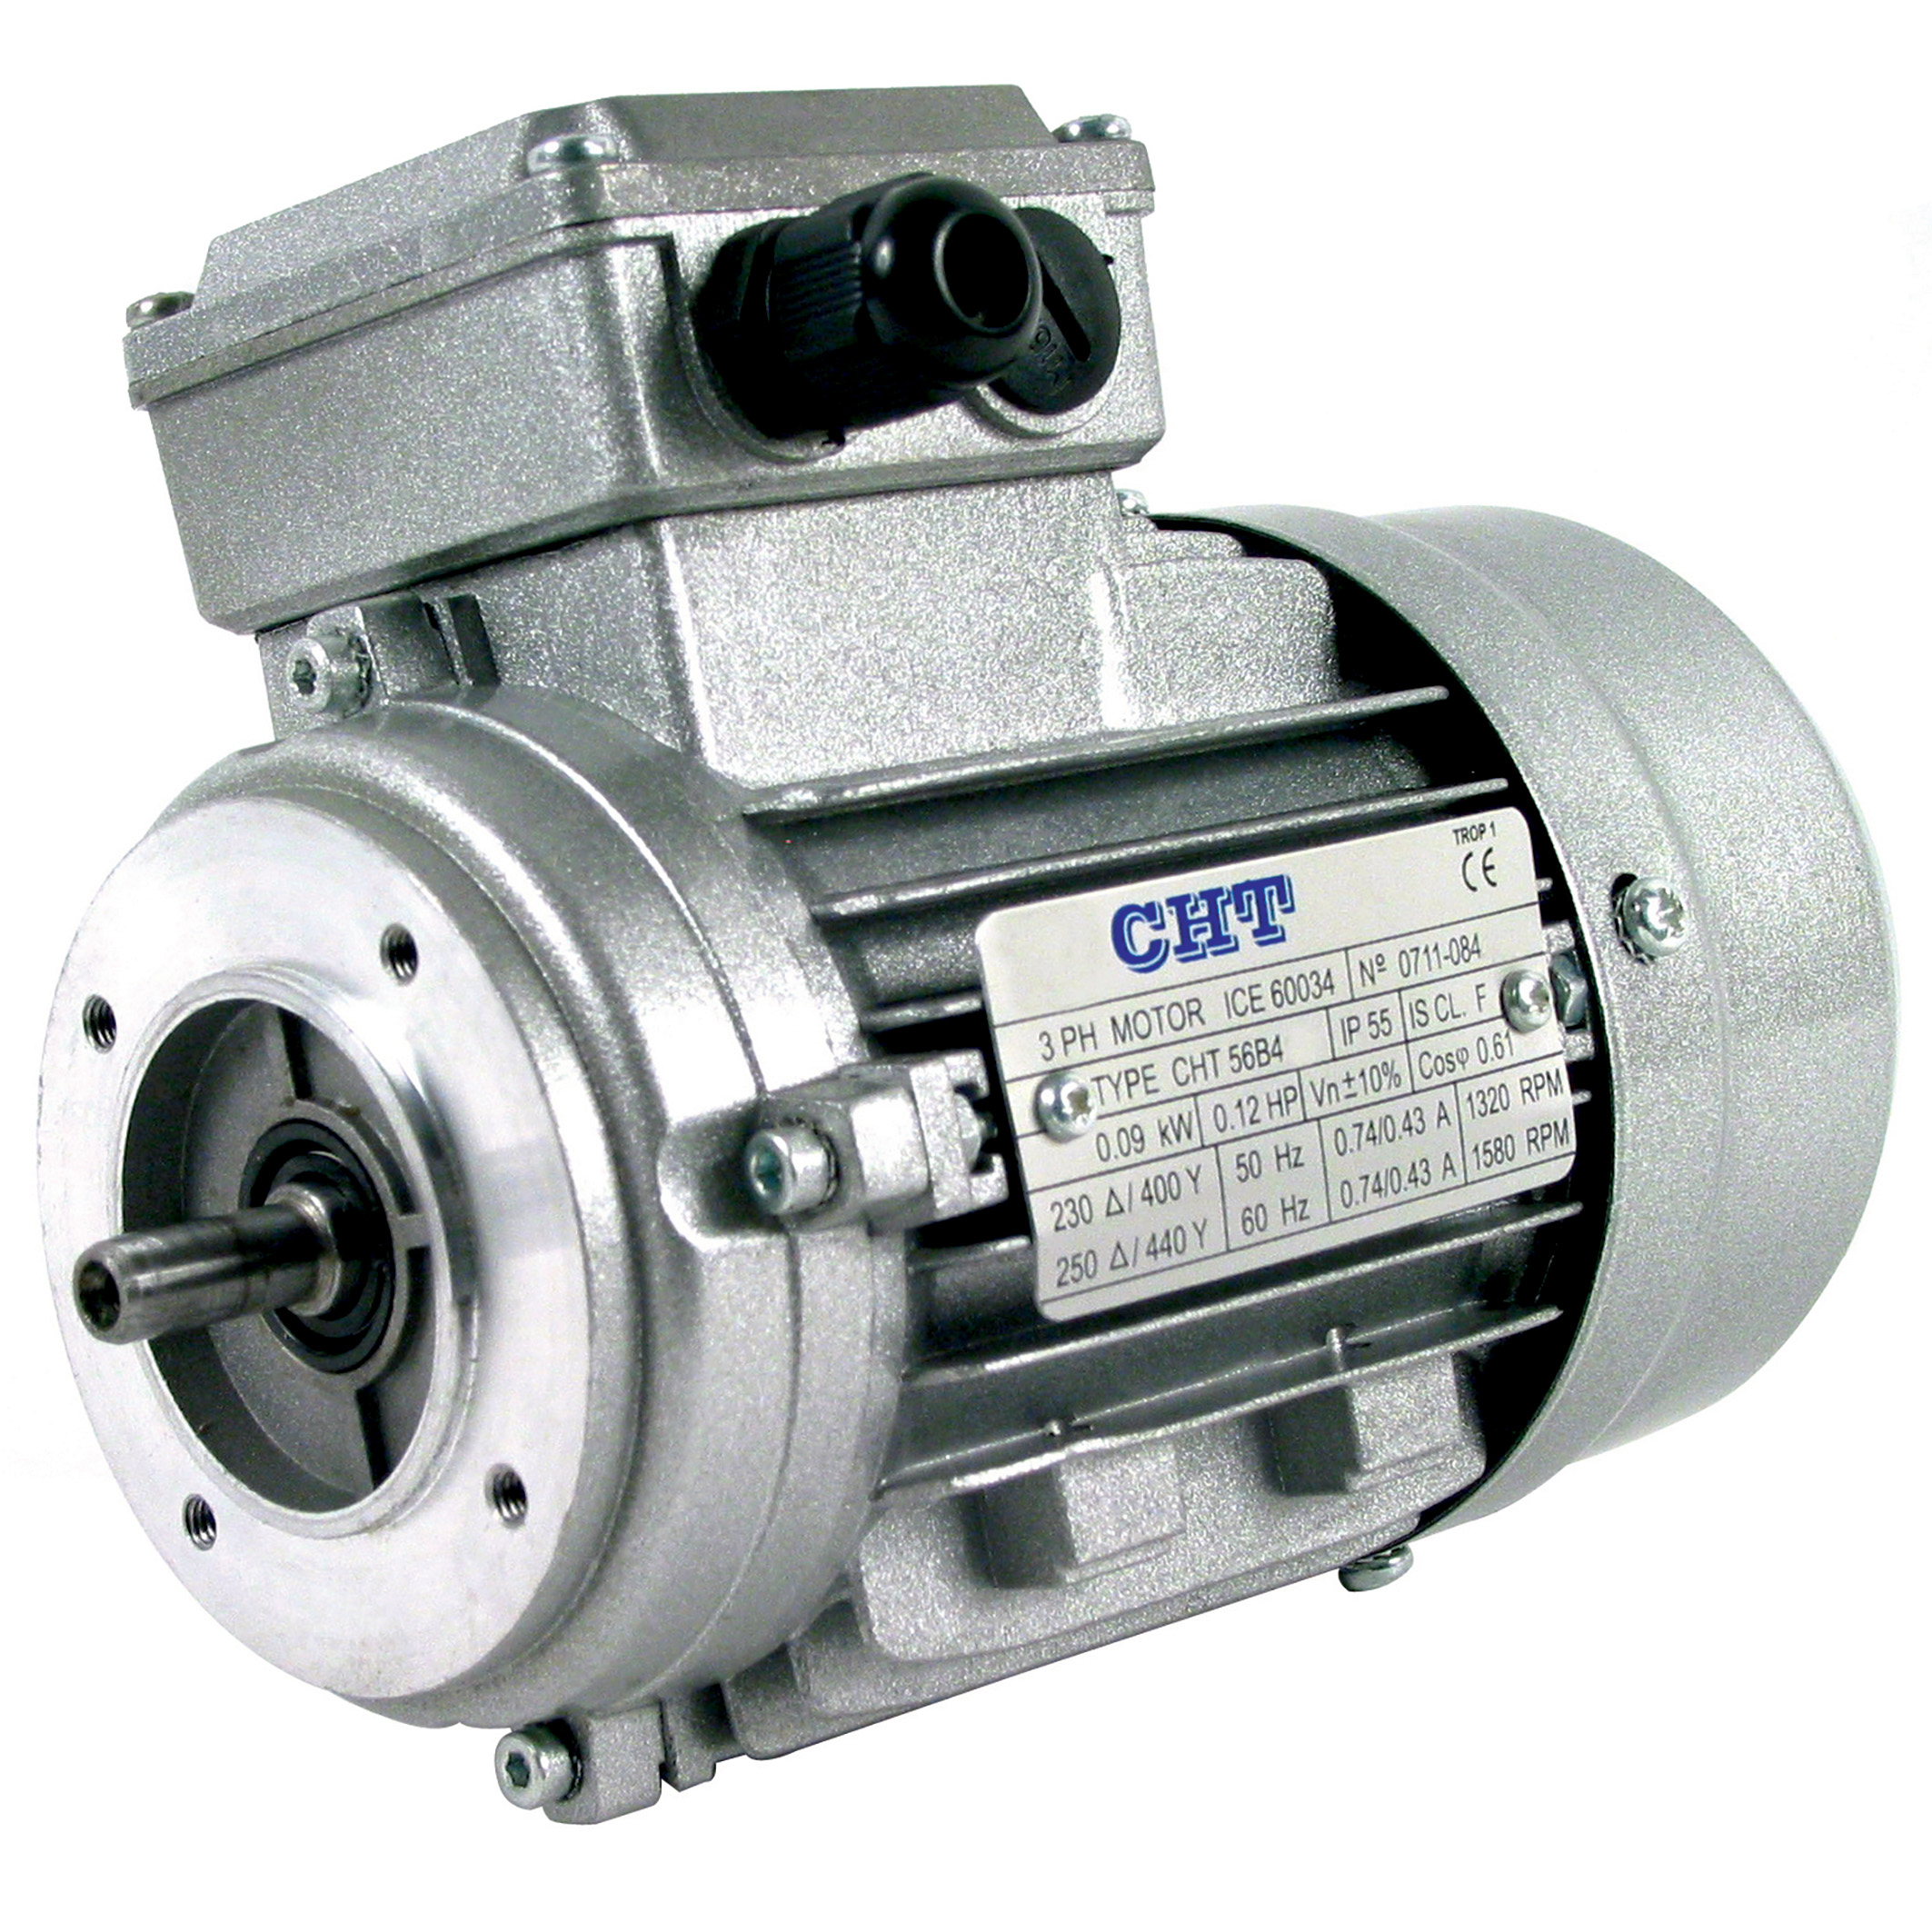 Asynchronous AC Motor 1.1 to 1.85kW - 1.1 to 1.85kW - up to 9.24Nm - three phase